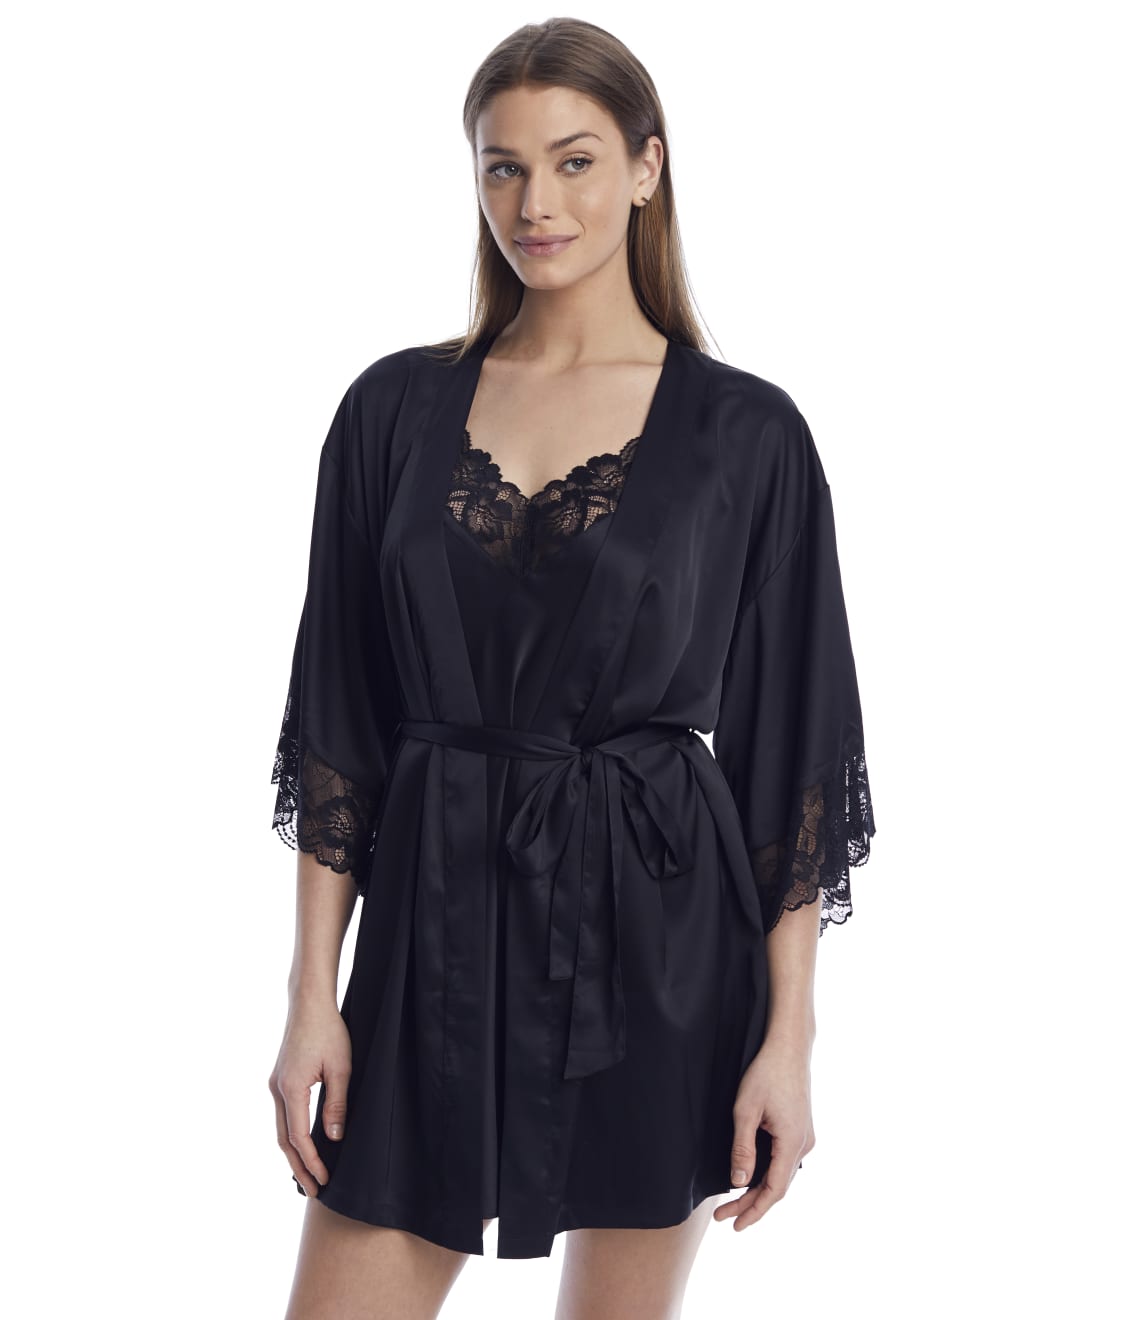 Details about   Sexy Black Delicate Lace Short Kimono Robe with Wide Sleeves Size 8-10 